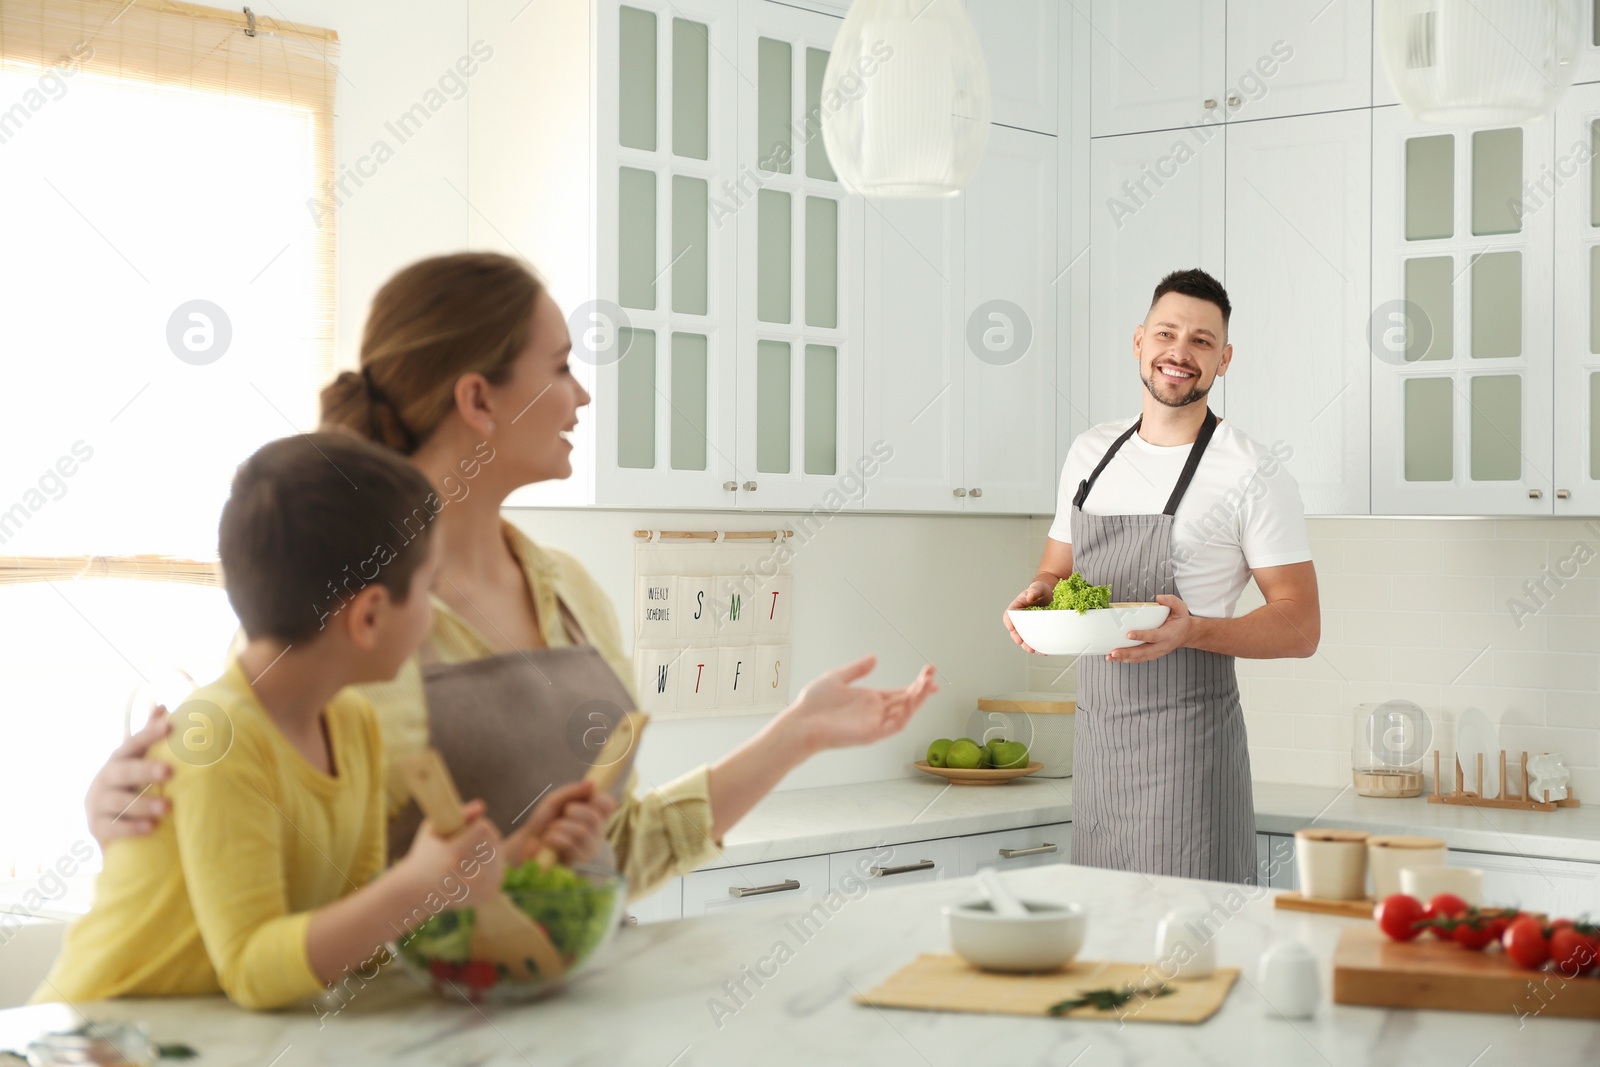 Photo of Happy family cooking salad together in kitchen